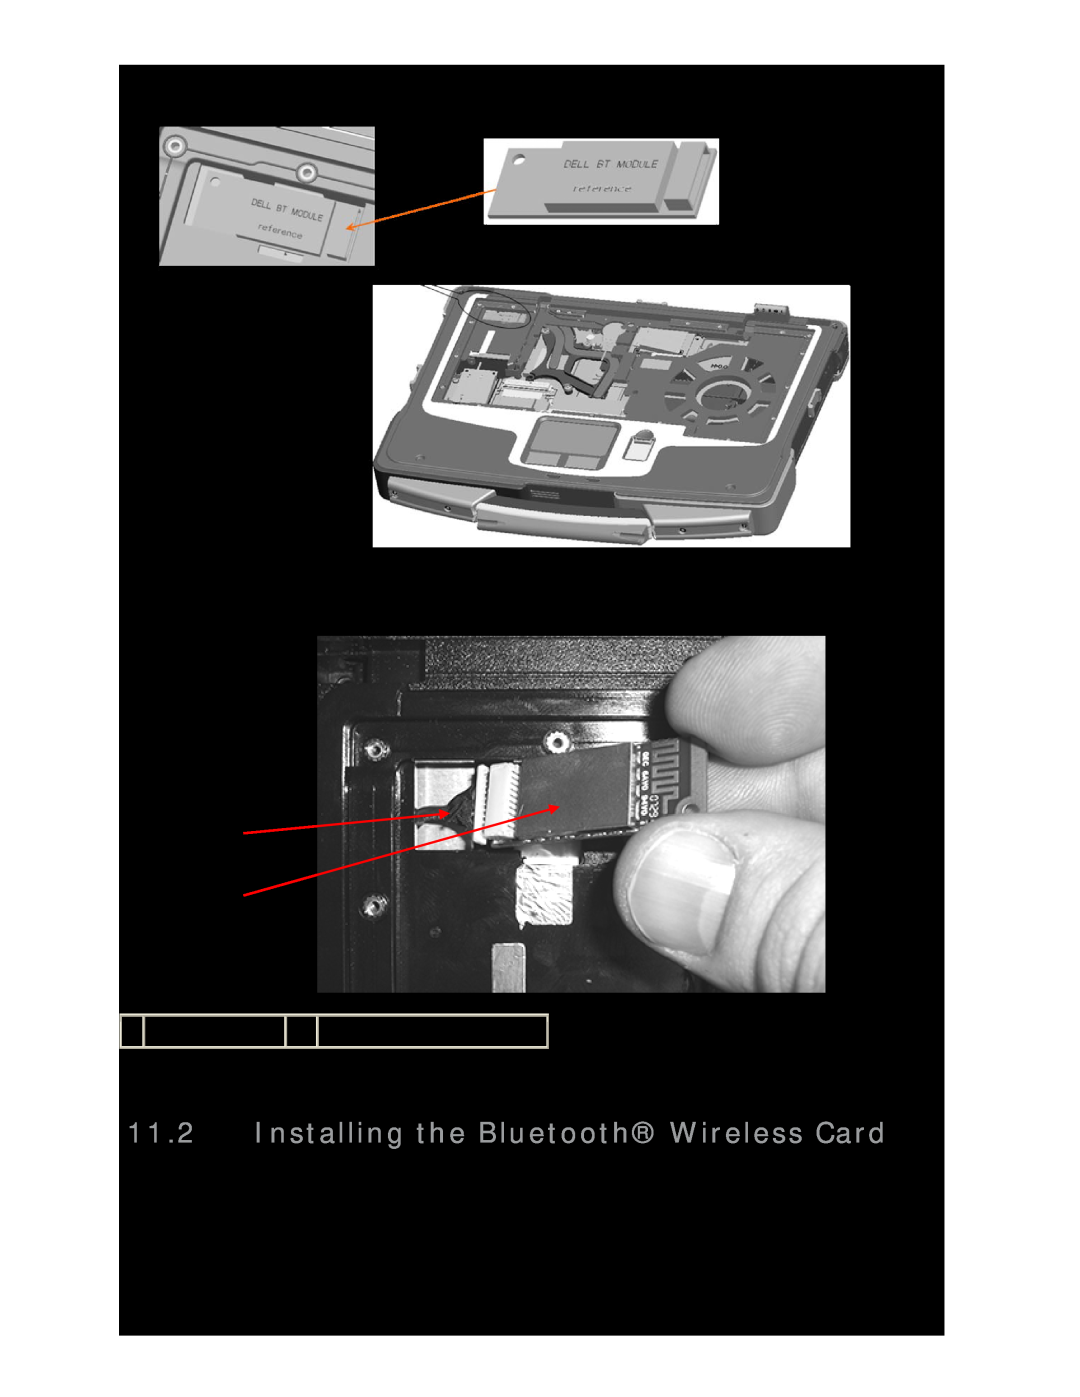 Dell D630 service manual Installing the Bluetooth Wireless Card 